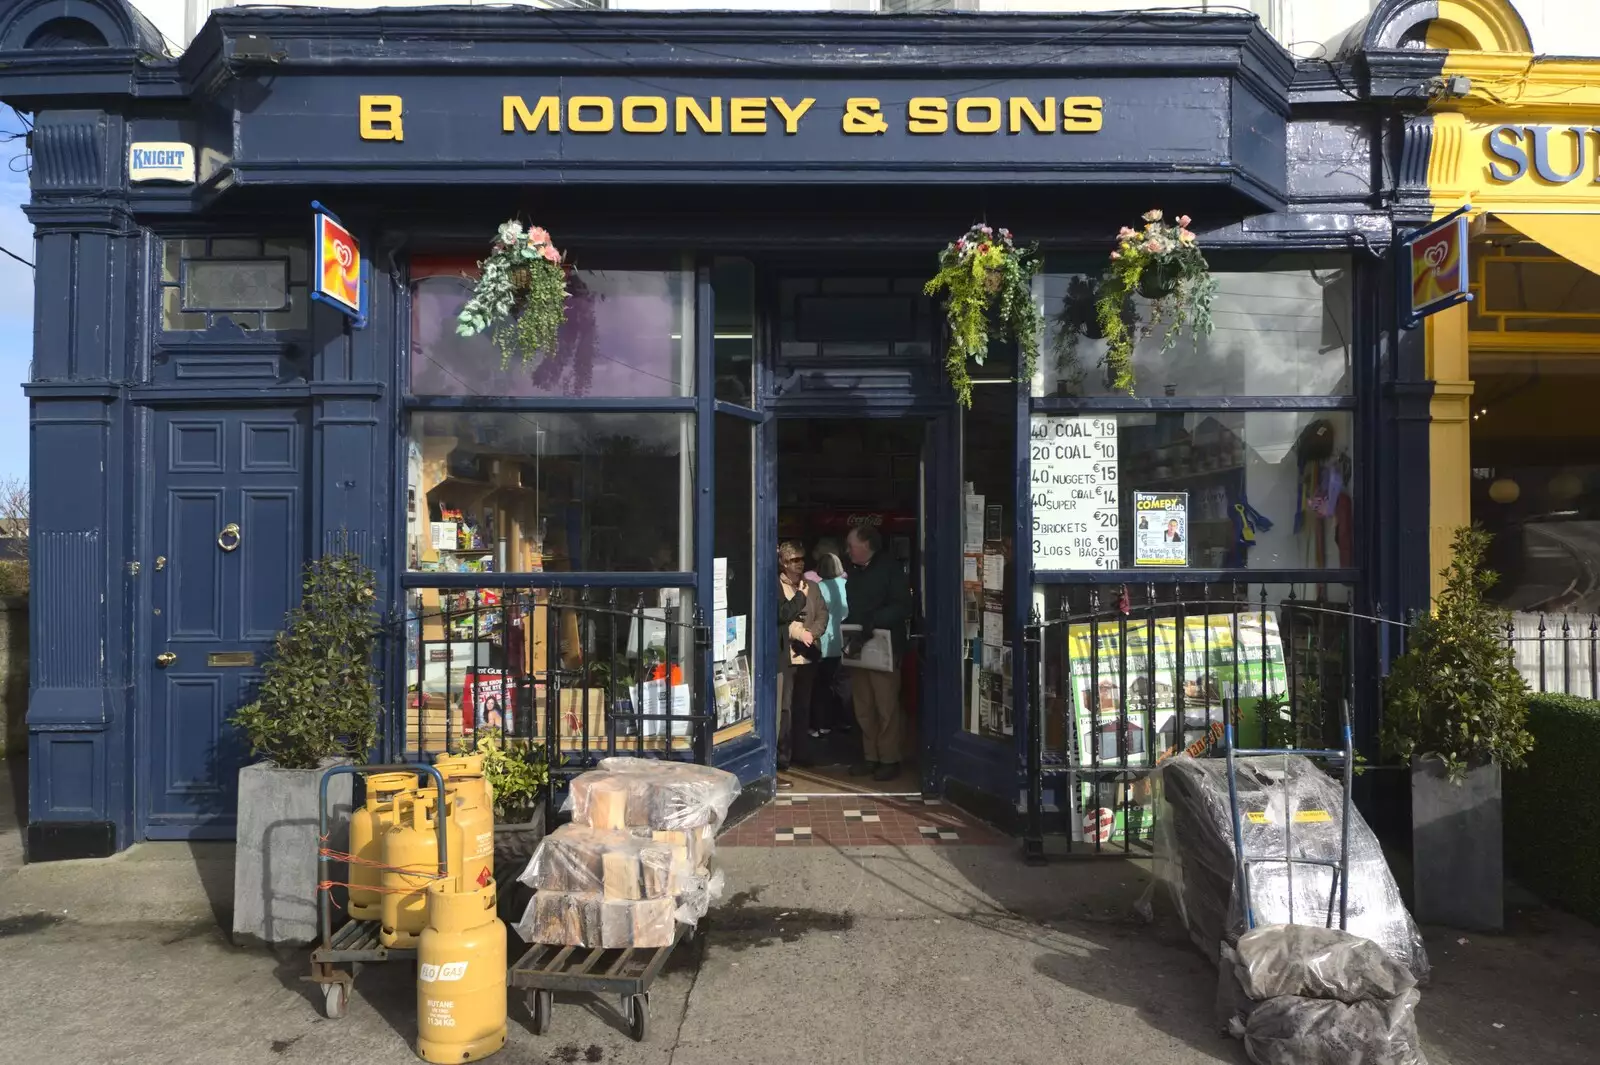 Mooney and Sons hardware store in Greystones, from A Day in Greystones, County Dublin, Ireland - 28th February 2010